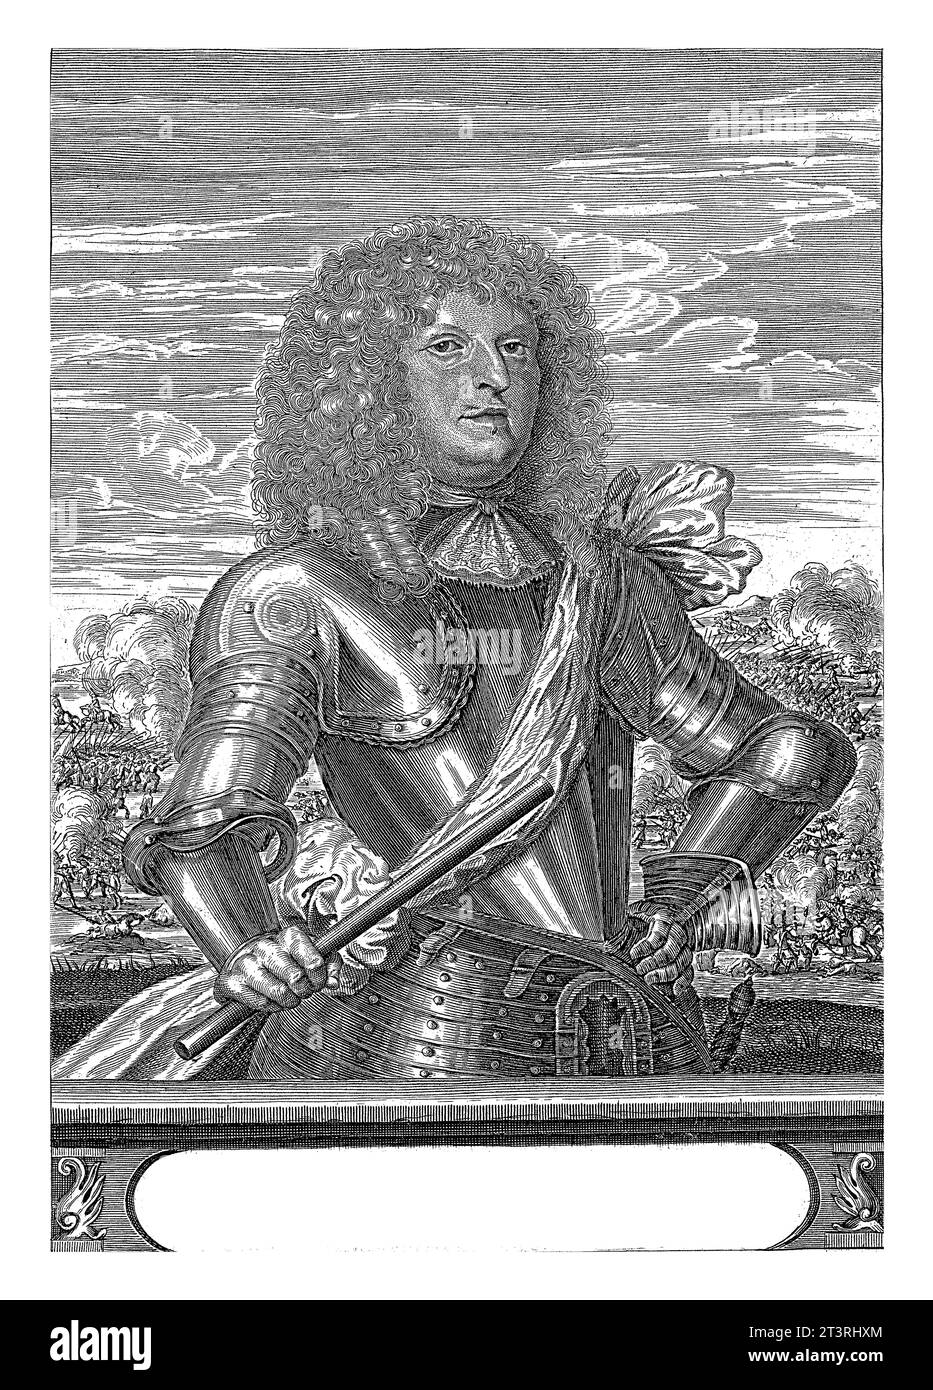 Portrait of Frederick IV of Baden, Christian Hagen, c. 1663 - 1695 Portrait to the right of Frederick of Baden, dressed in armour over a sash. Stock Photo